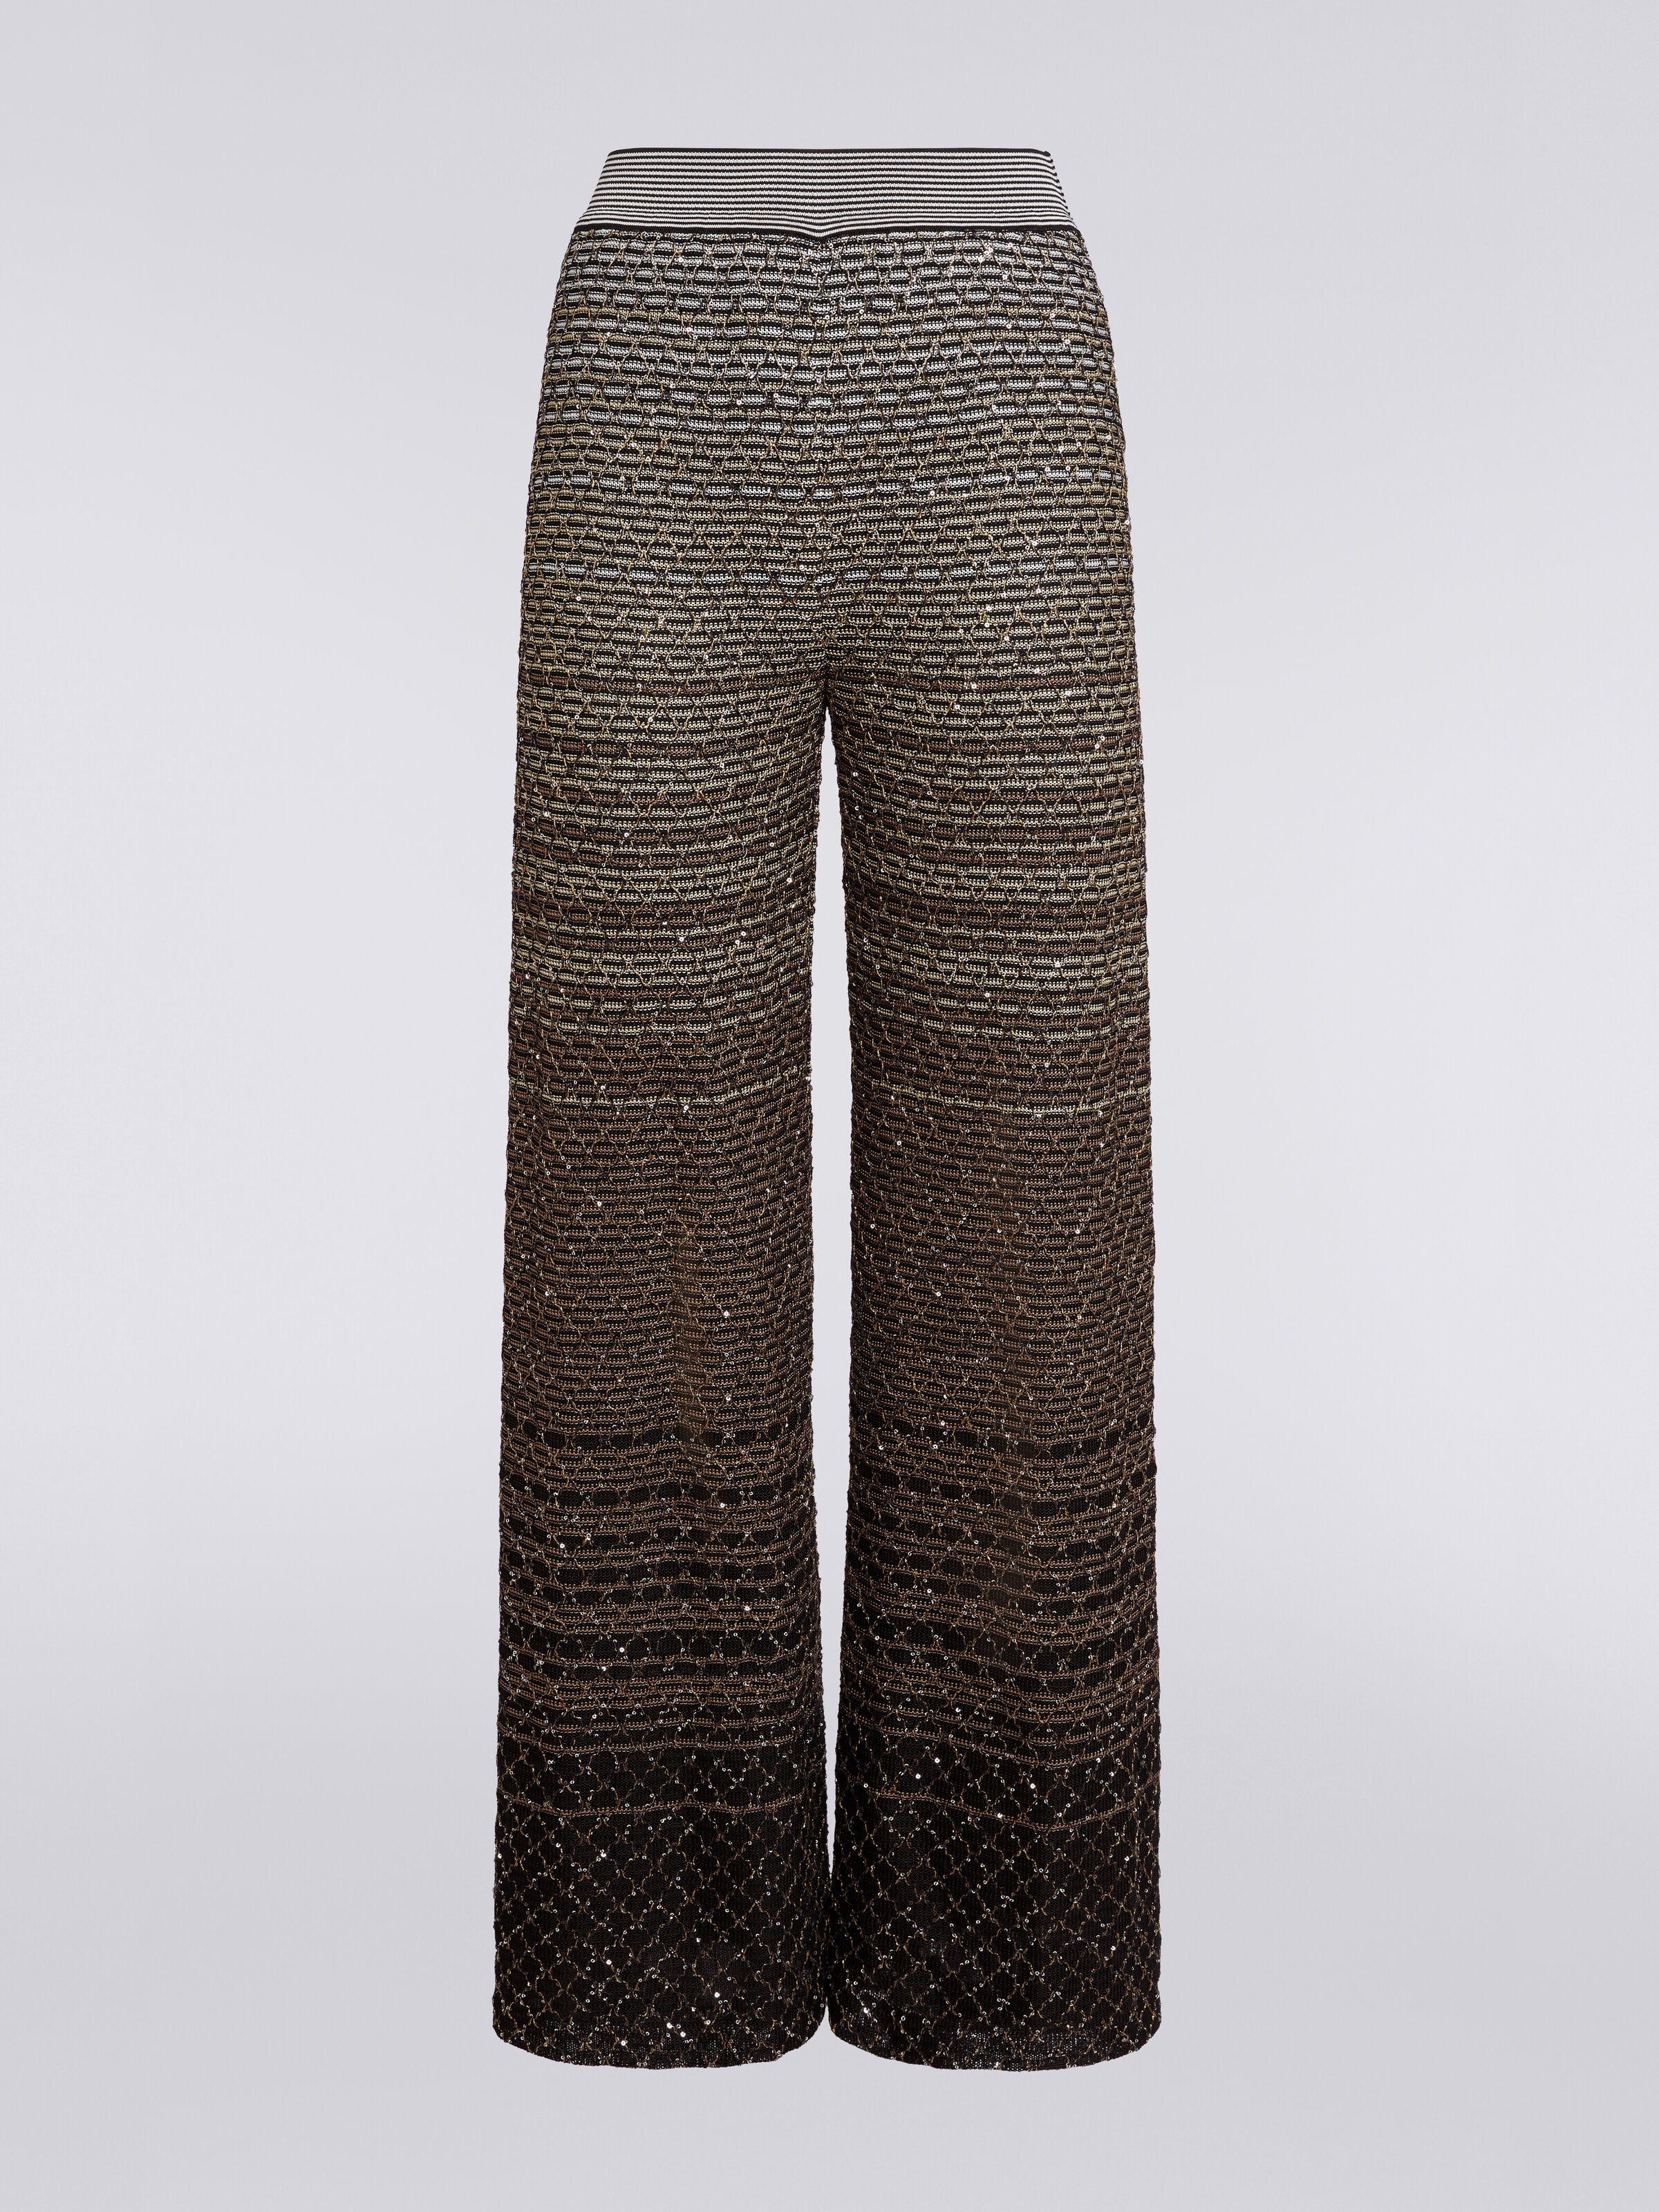 Trousers in dégradé knit with sequins, Multicoloured  - 0